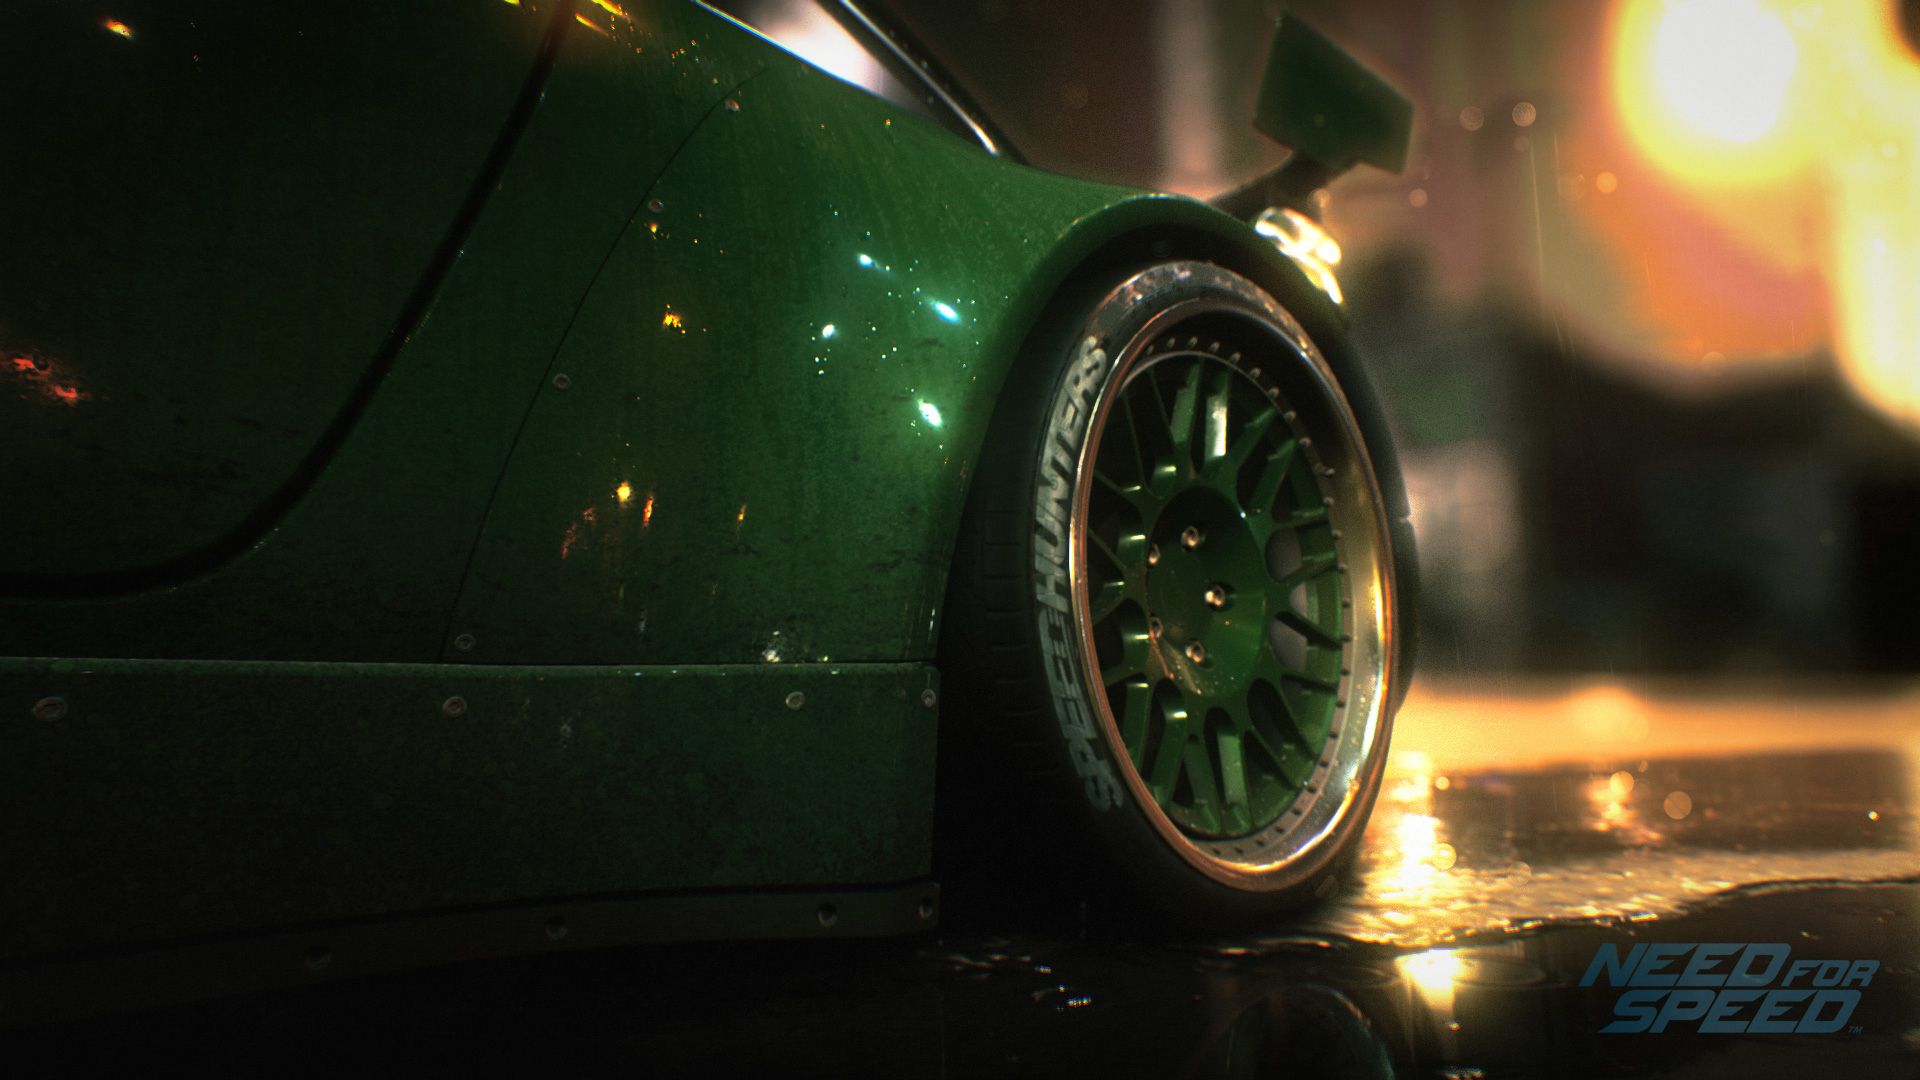 Need for Speed reboot - 2